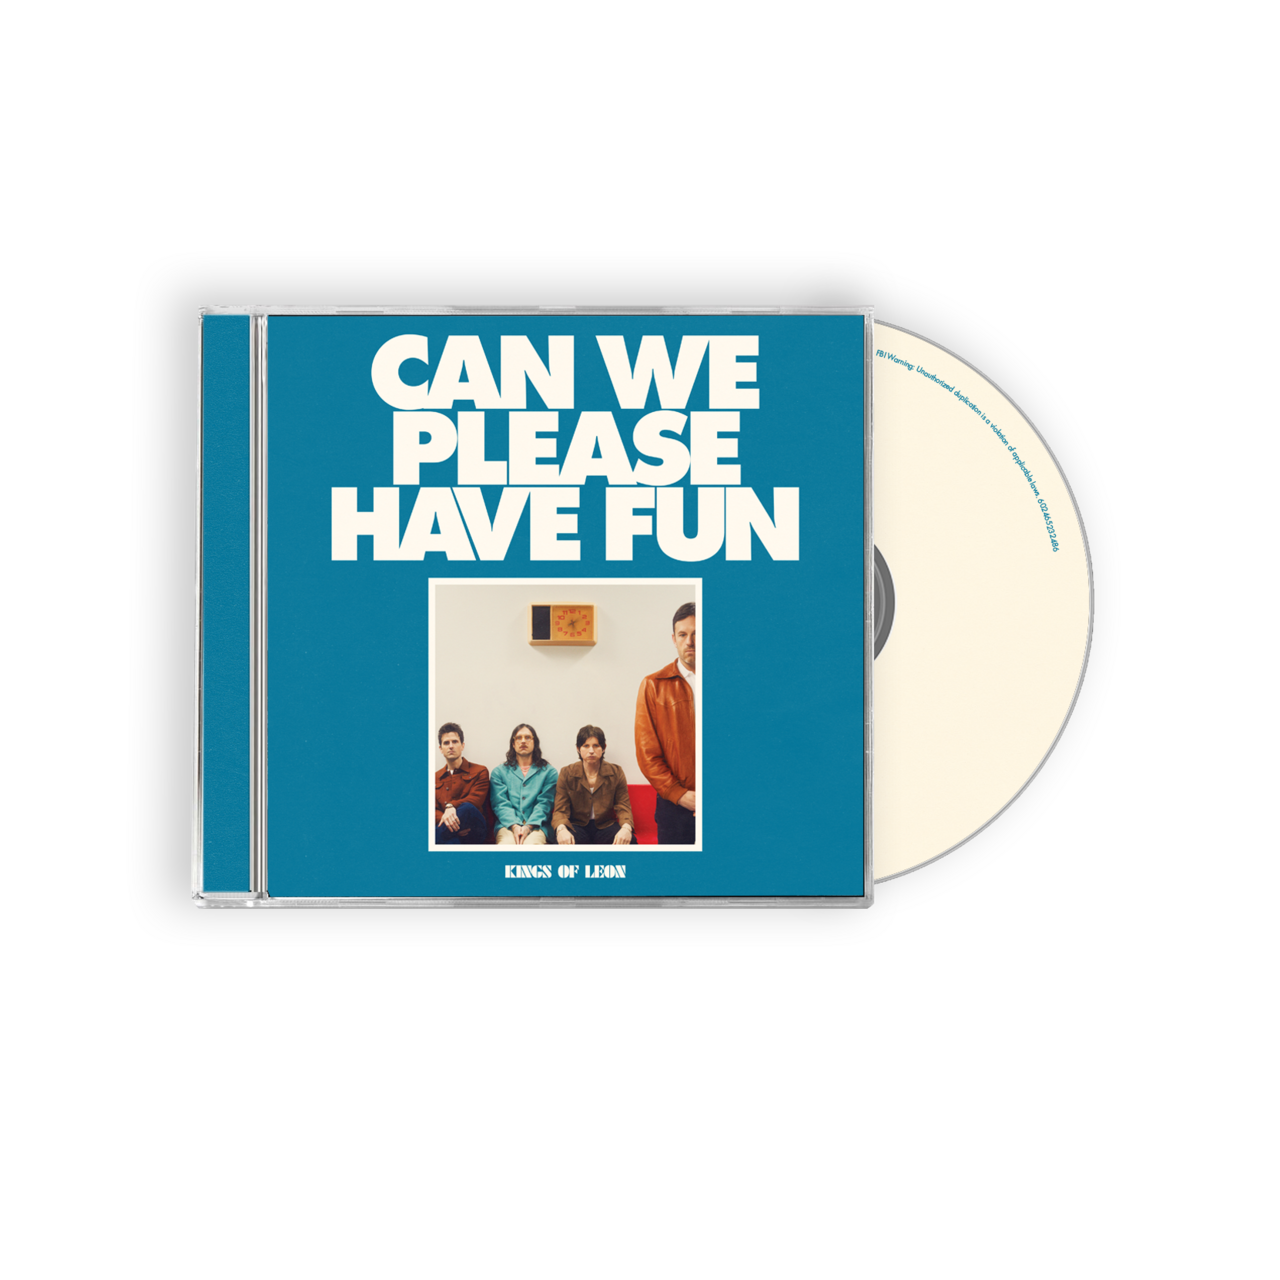 Can We Please Have Fun: CD, Cassette + Signed Art Card